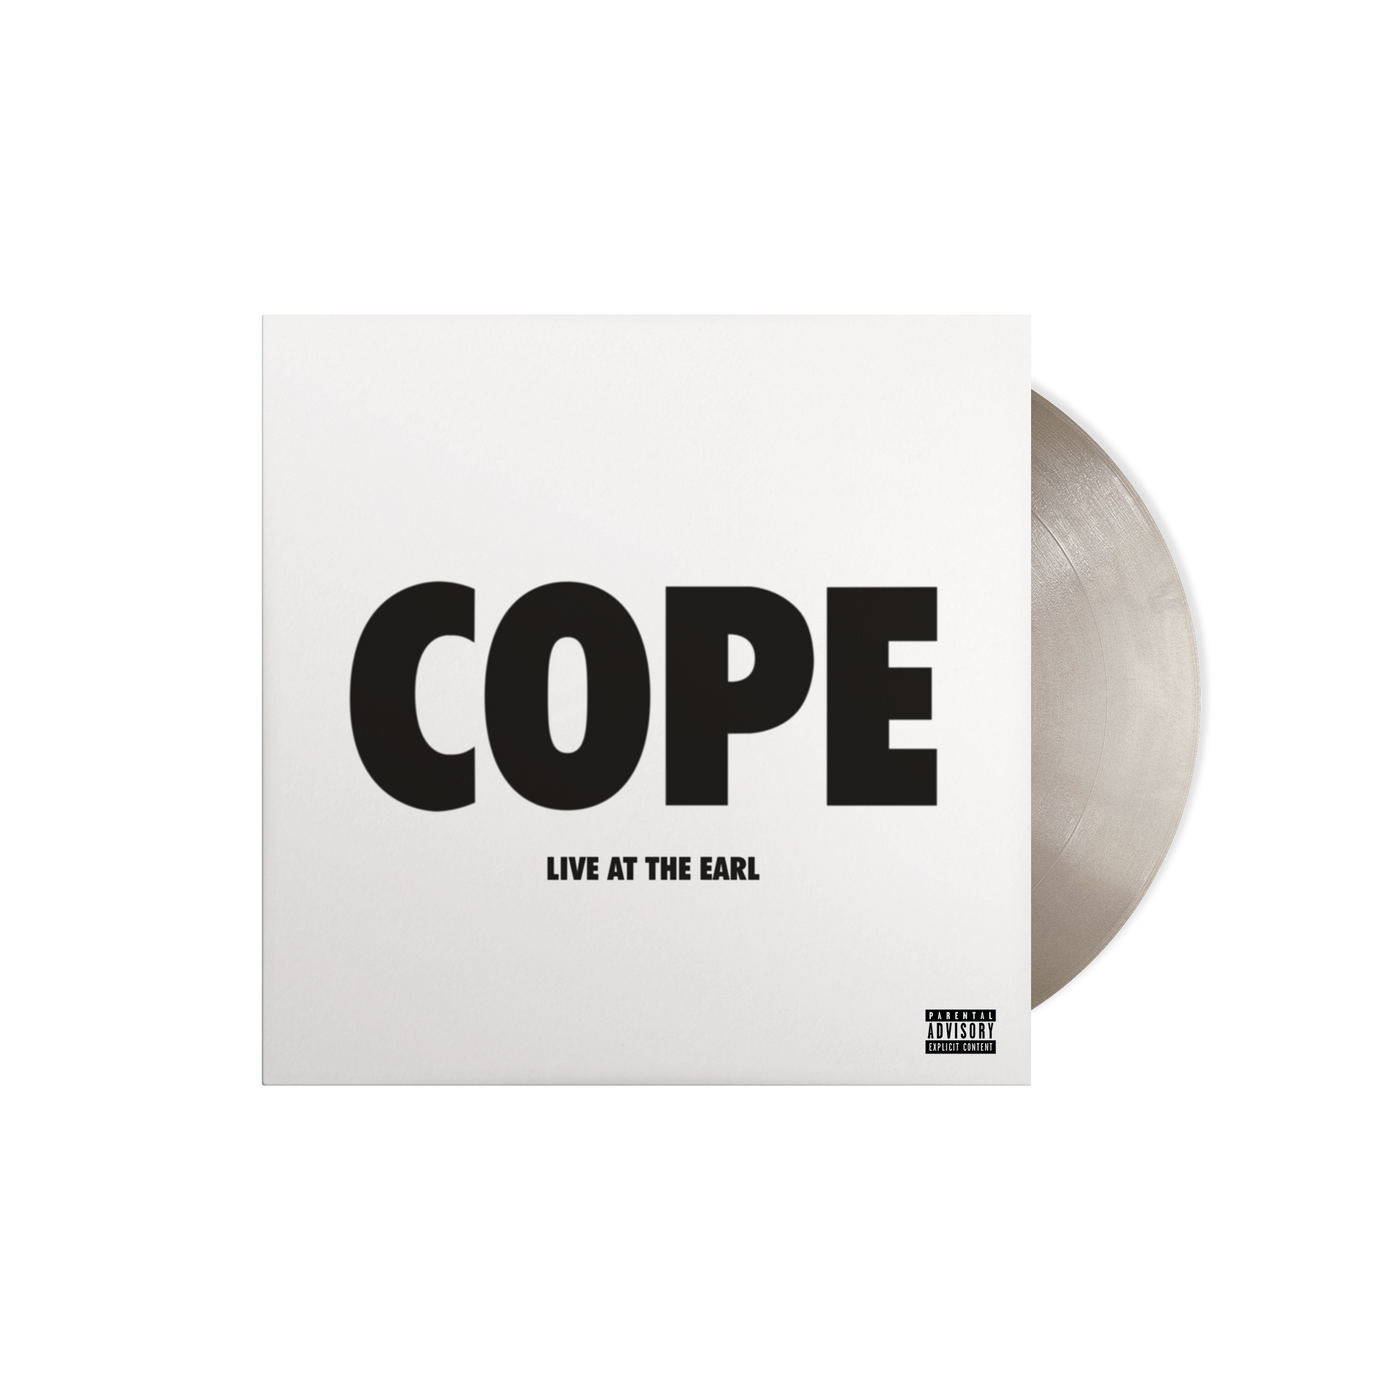 COPE Live at the Earl - Limited Edition Silver Colored Vinyl